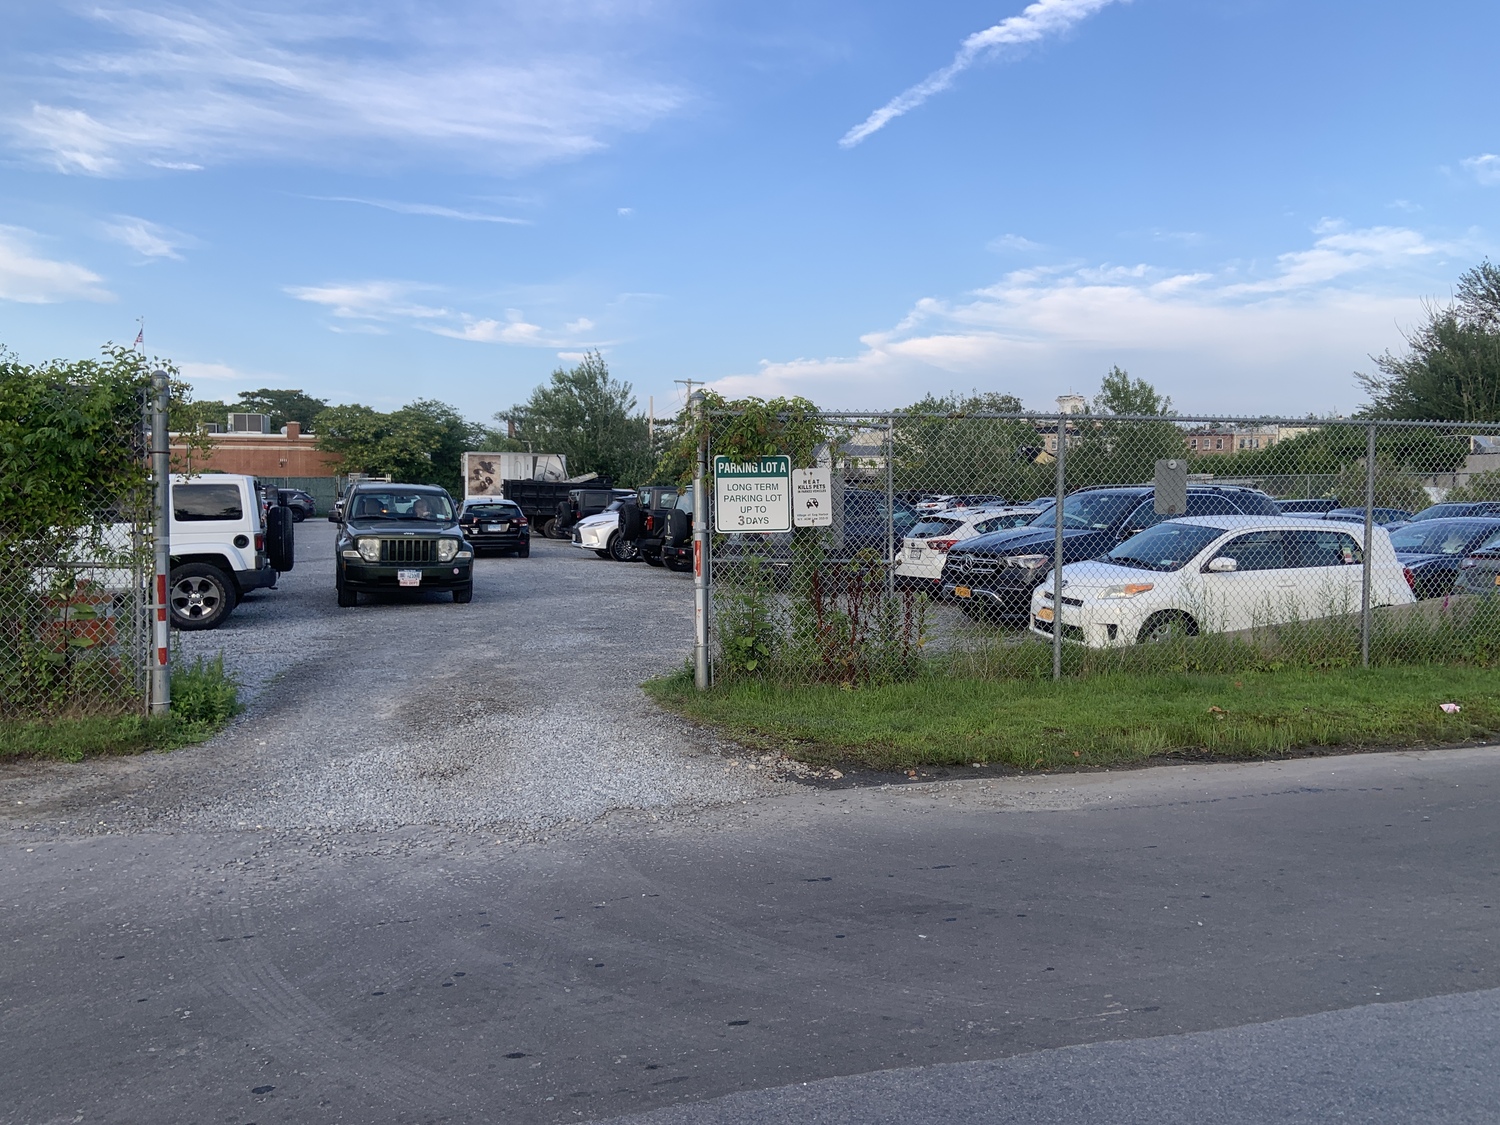 The New York State Public Service Commission has upheld a lease for the gas ball parking lot in Sag Harbor to a company controlled by developer Adam Potter. STEPHEN J. KOTZ